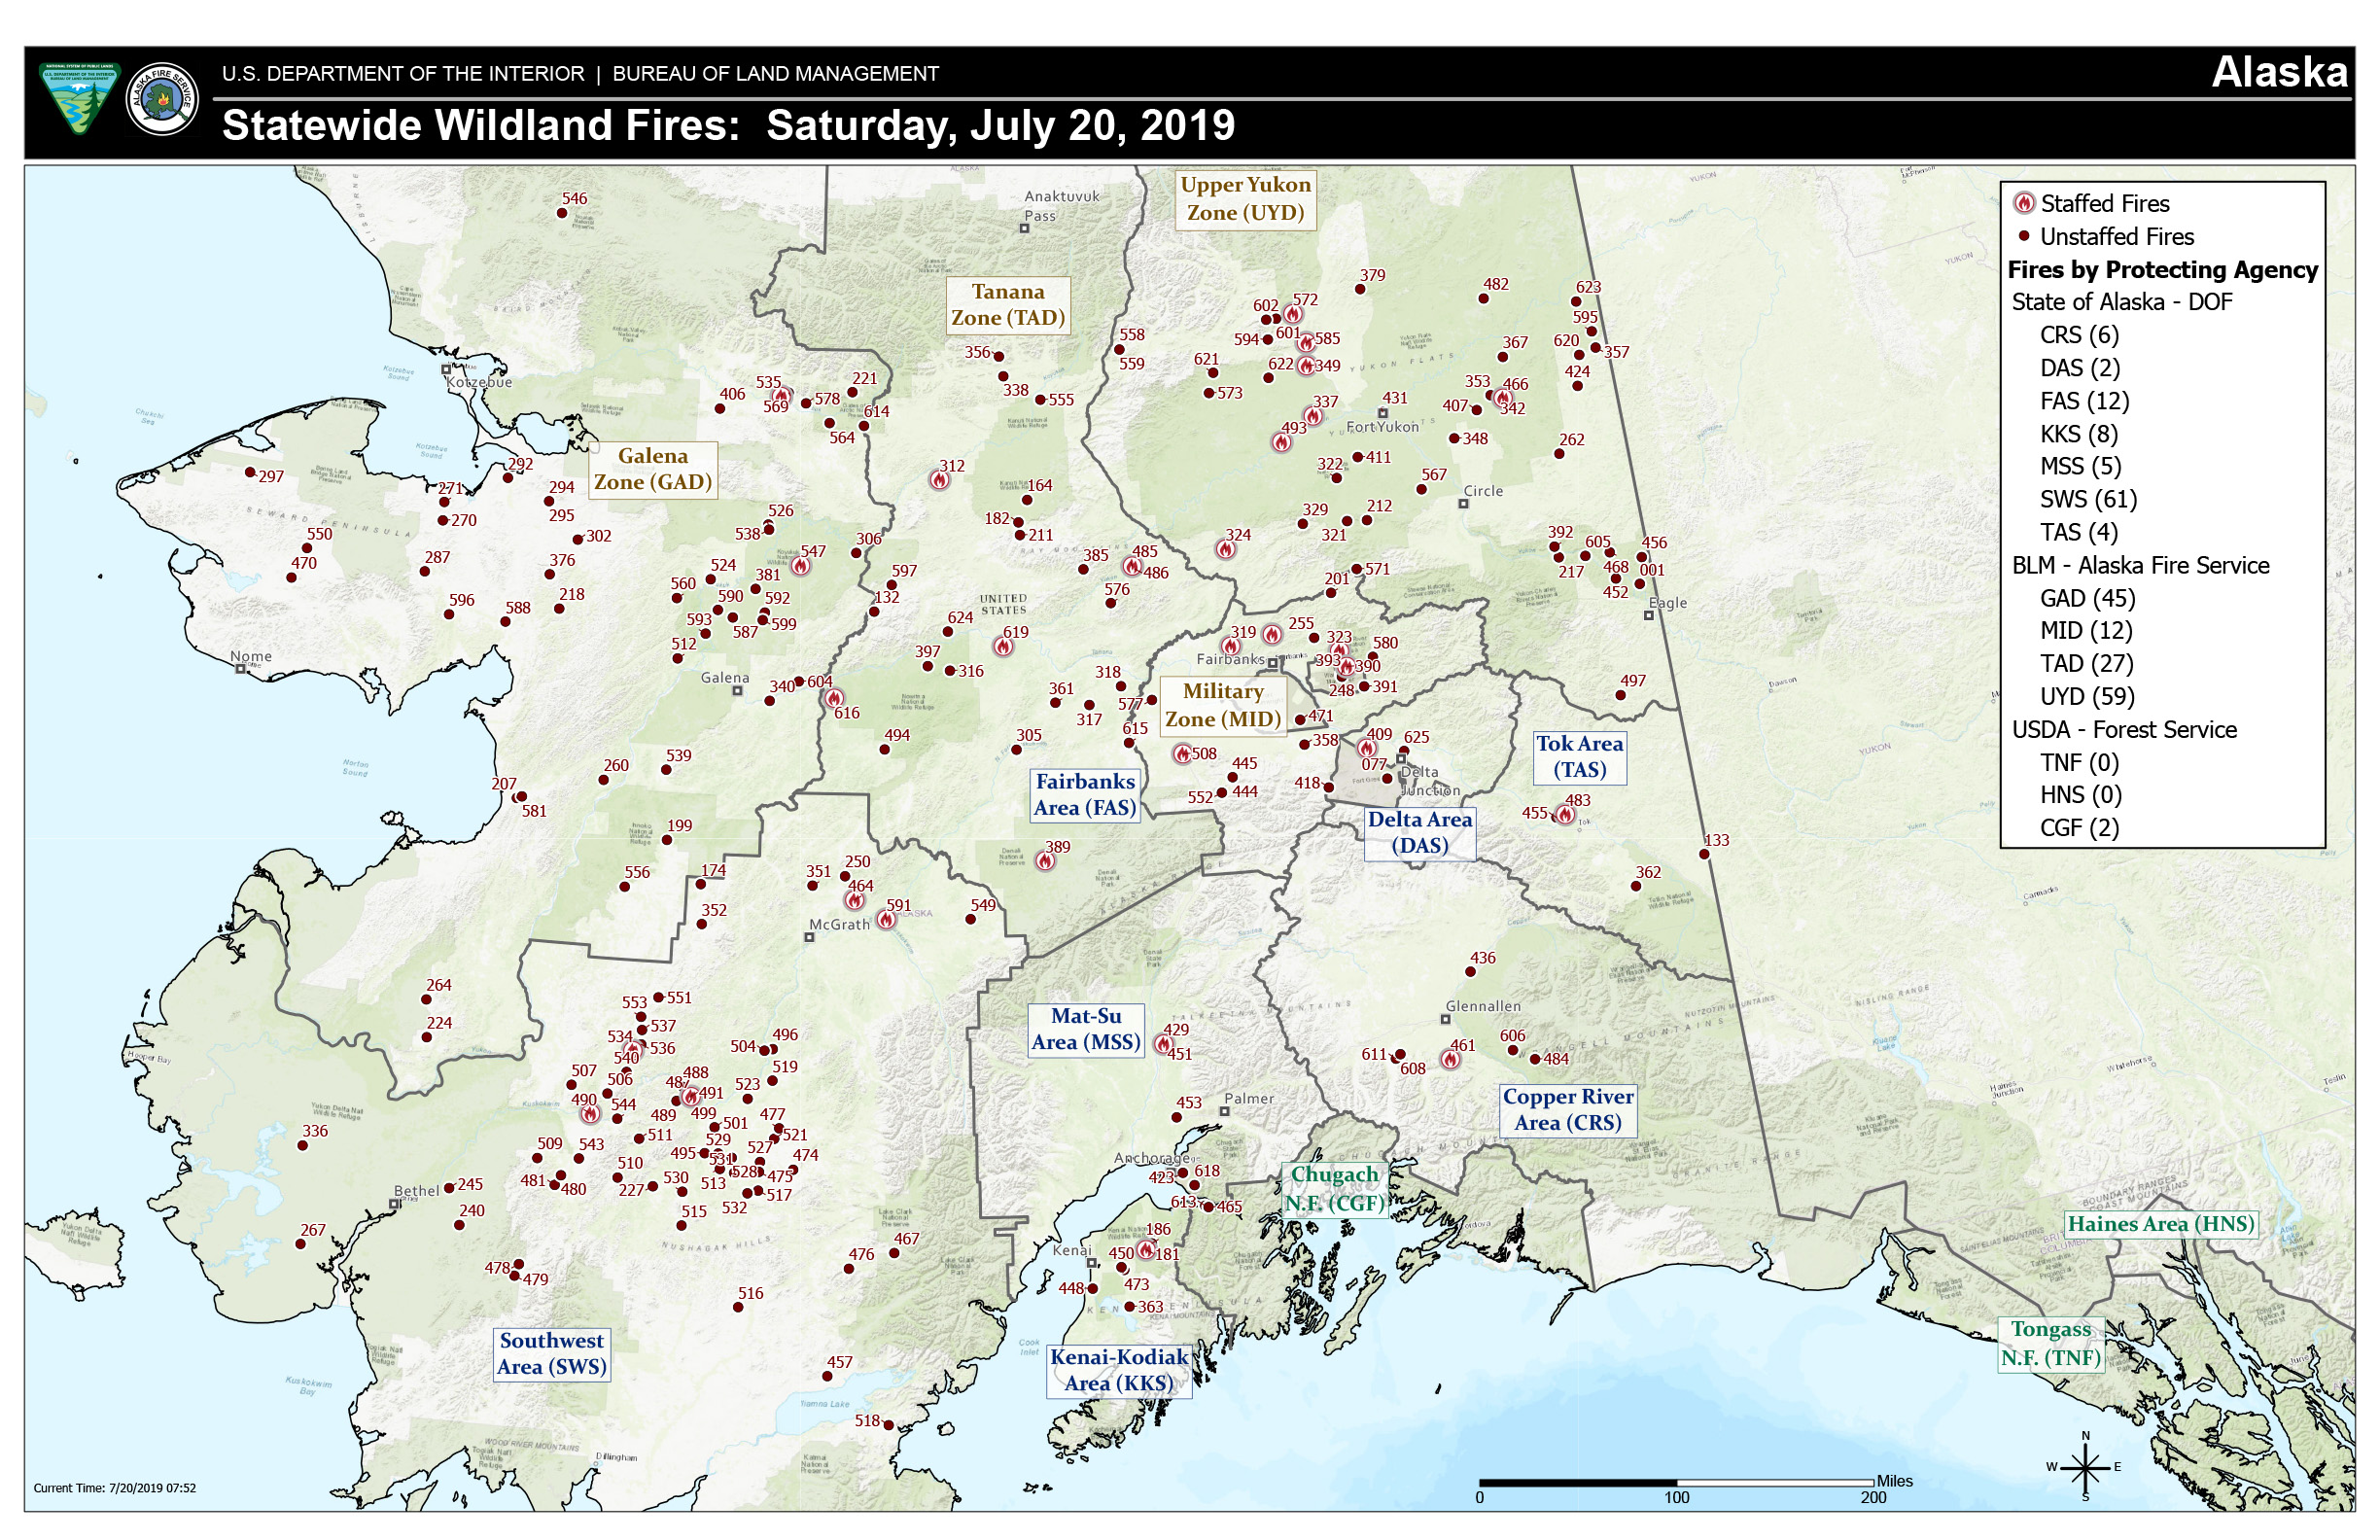 A map of active fires across Alaska on Saturday, July 20, 2019.

Download a PDF version of this map.